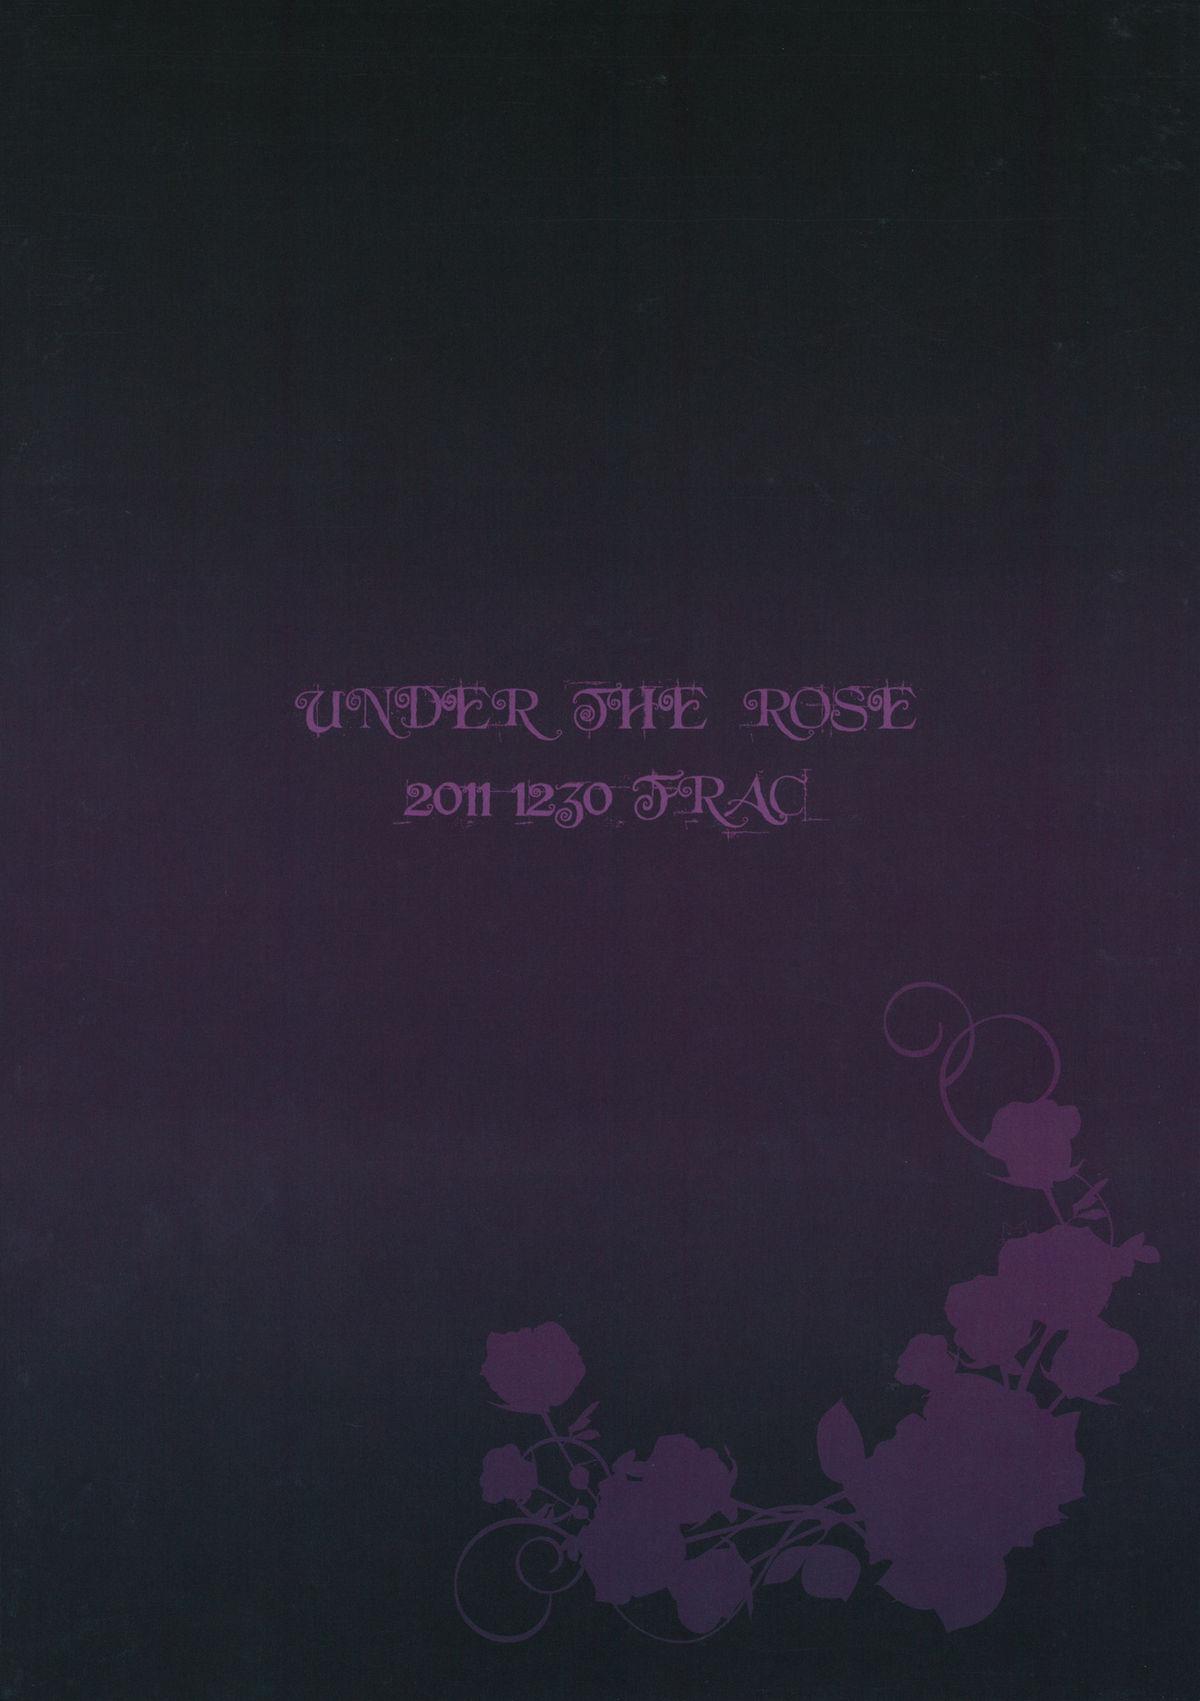 UNDER THE ROSE 27